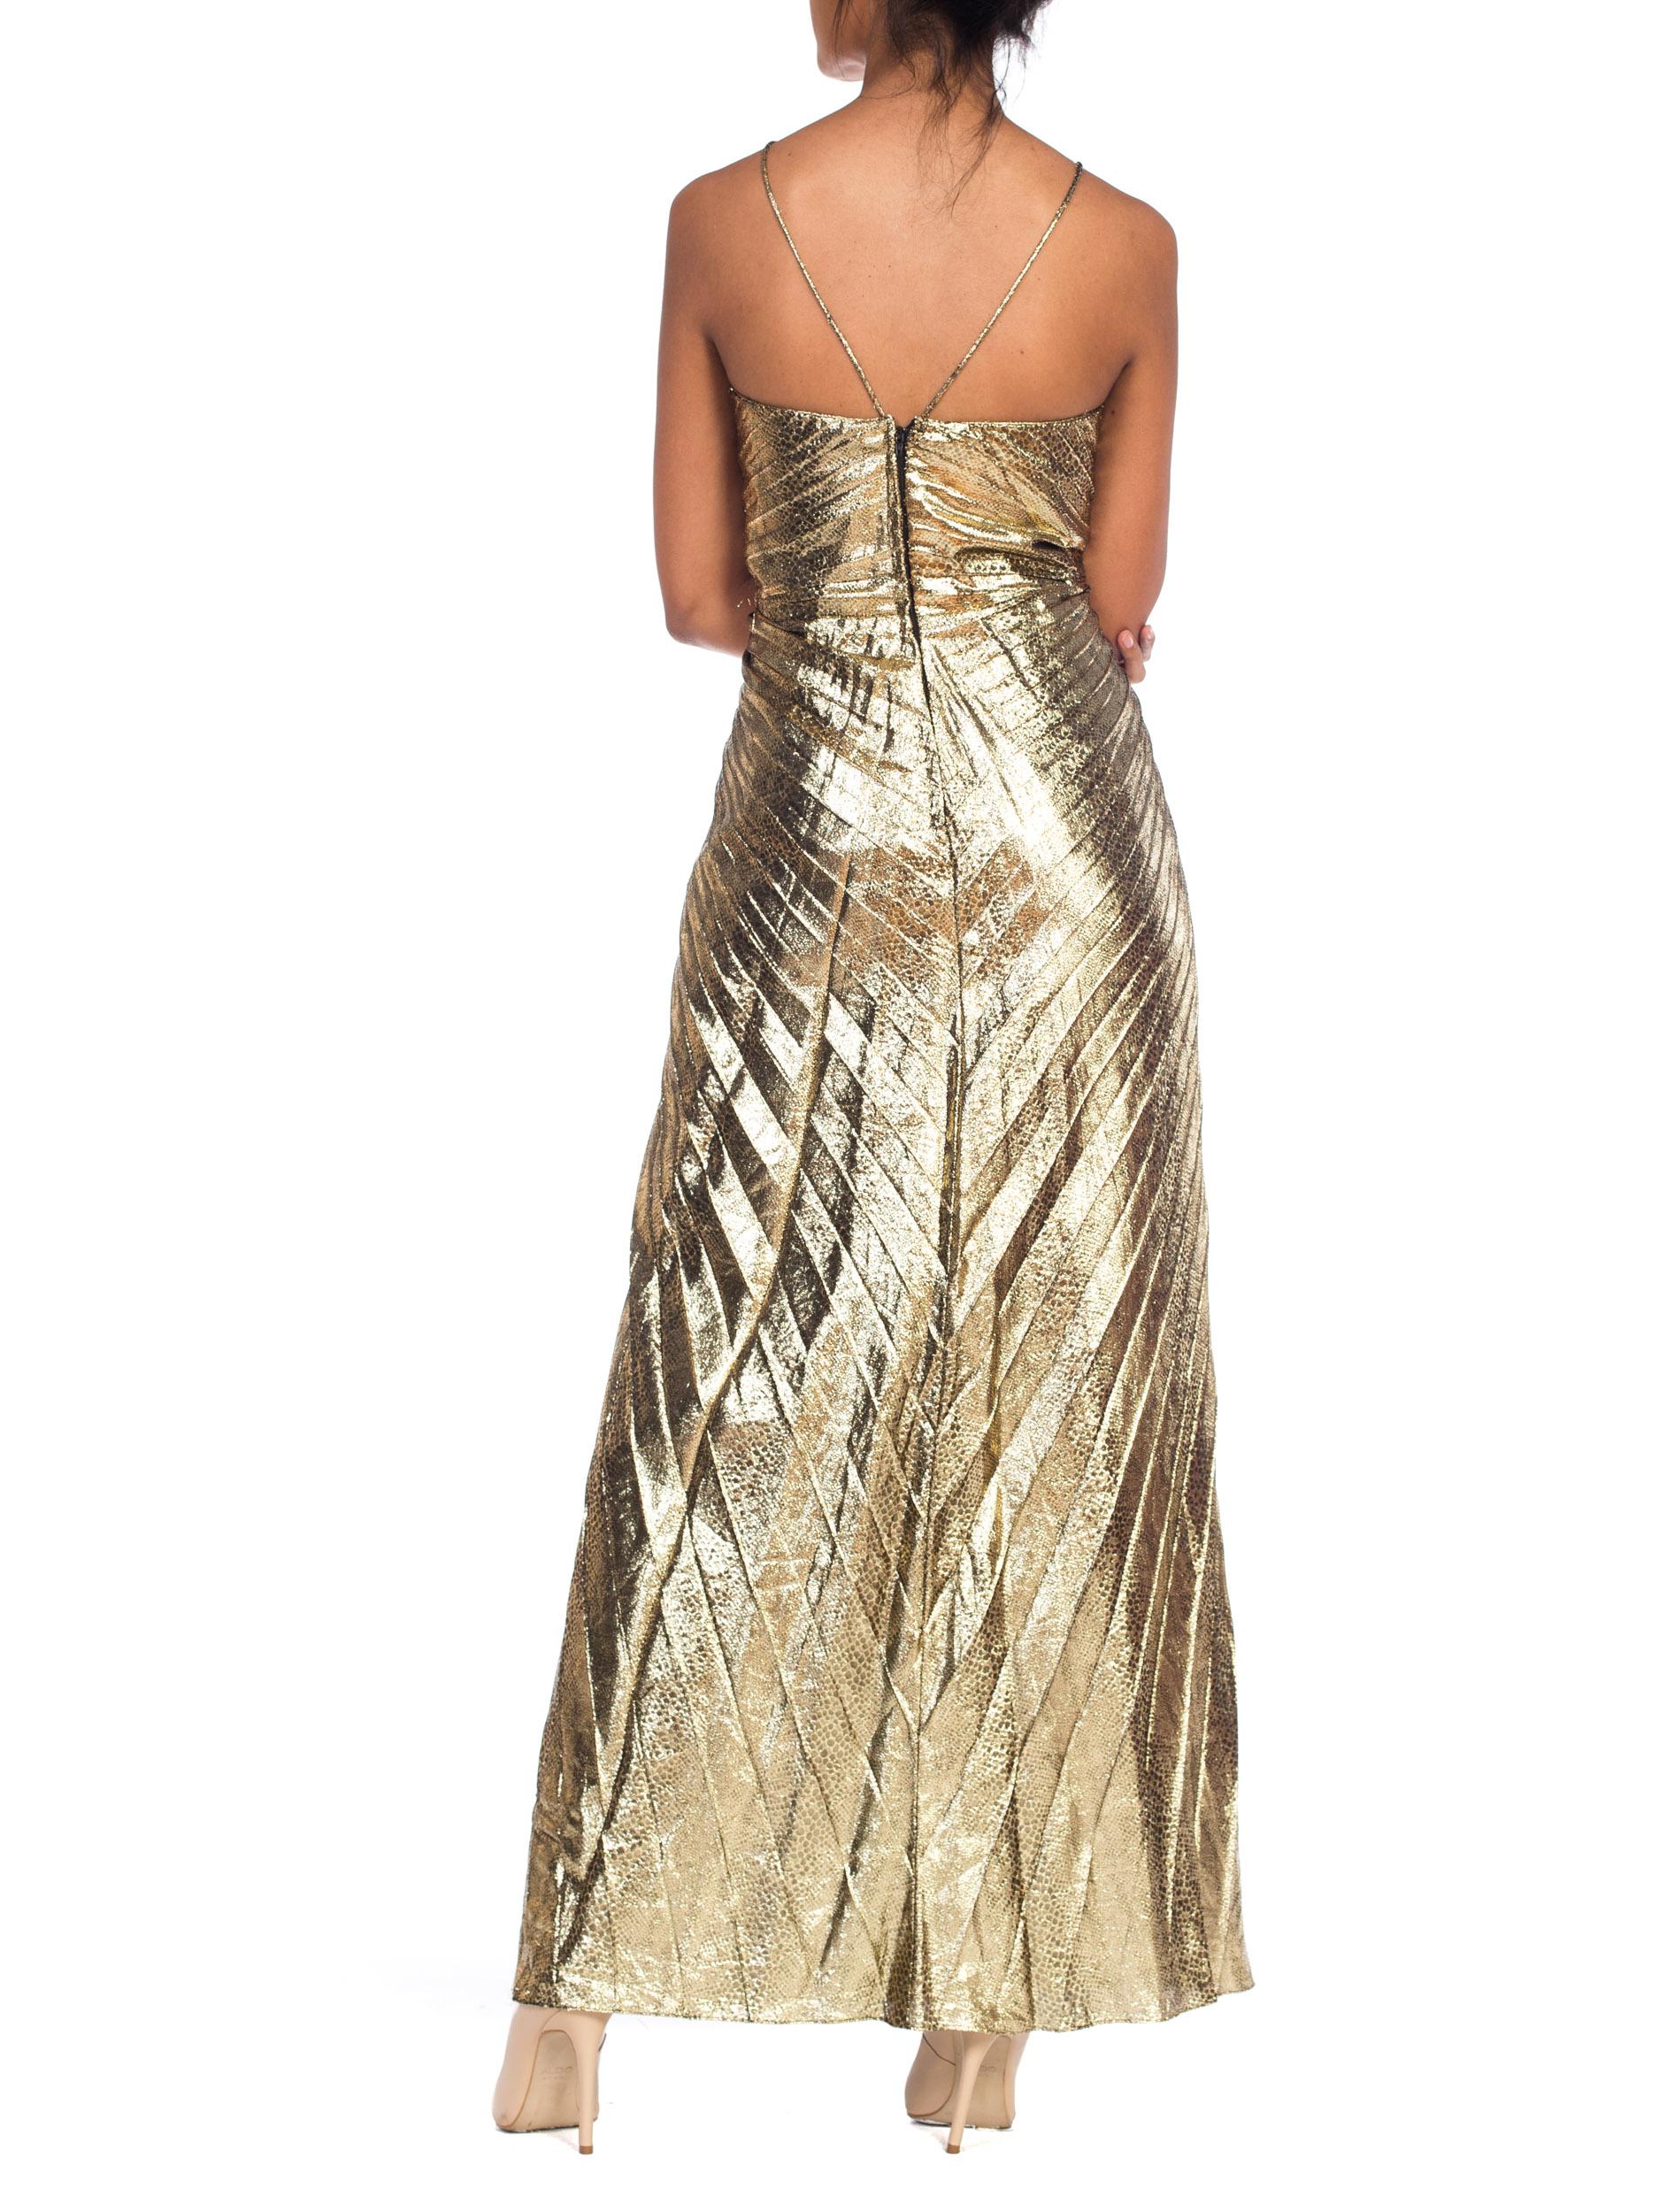 Iconic Travilla Gold Lamé Marilyn Monroe Disco Halter Gown 2